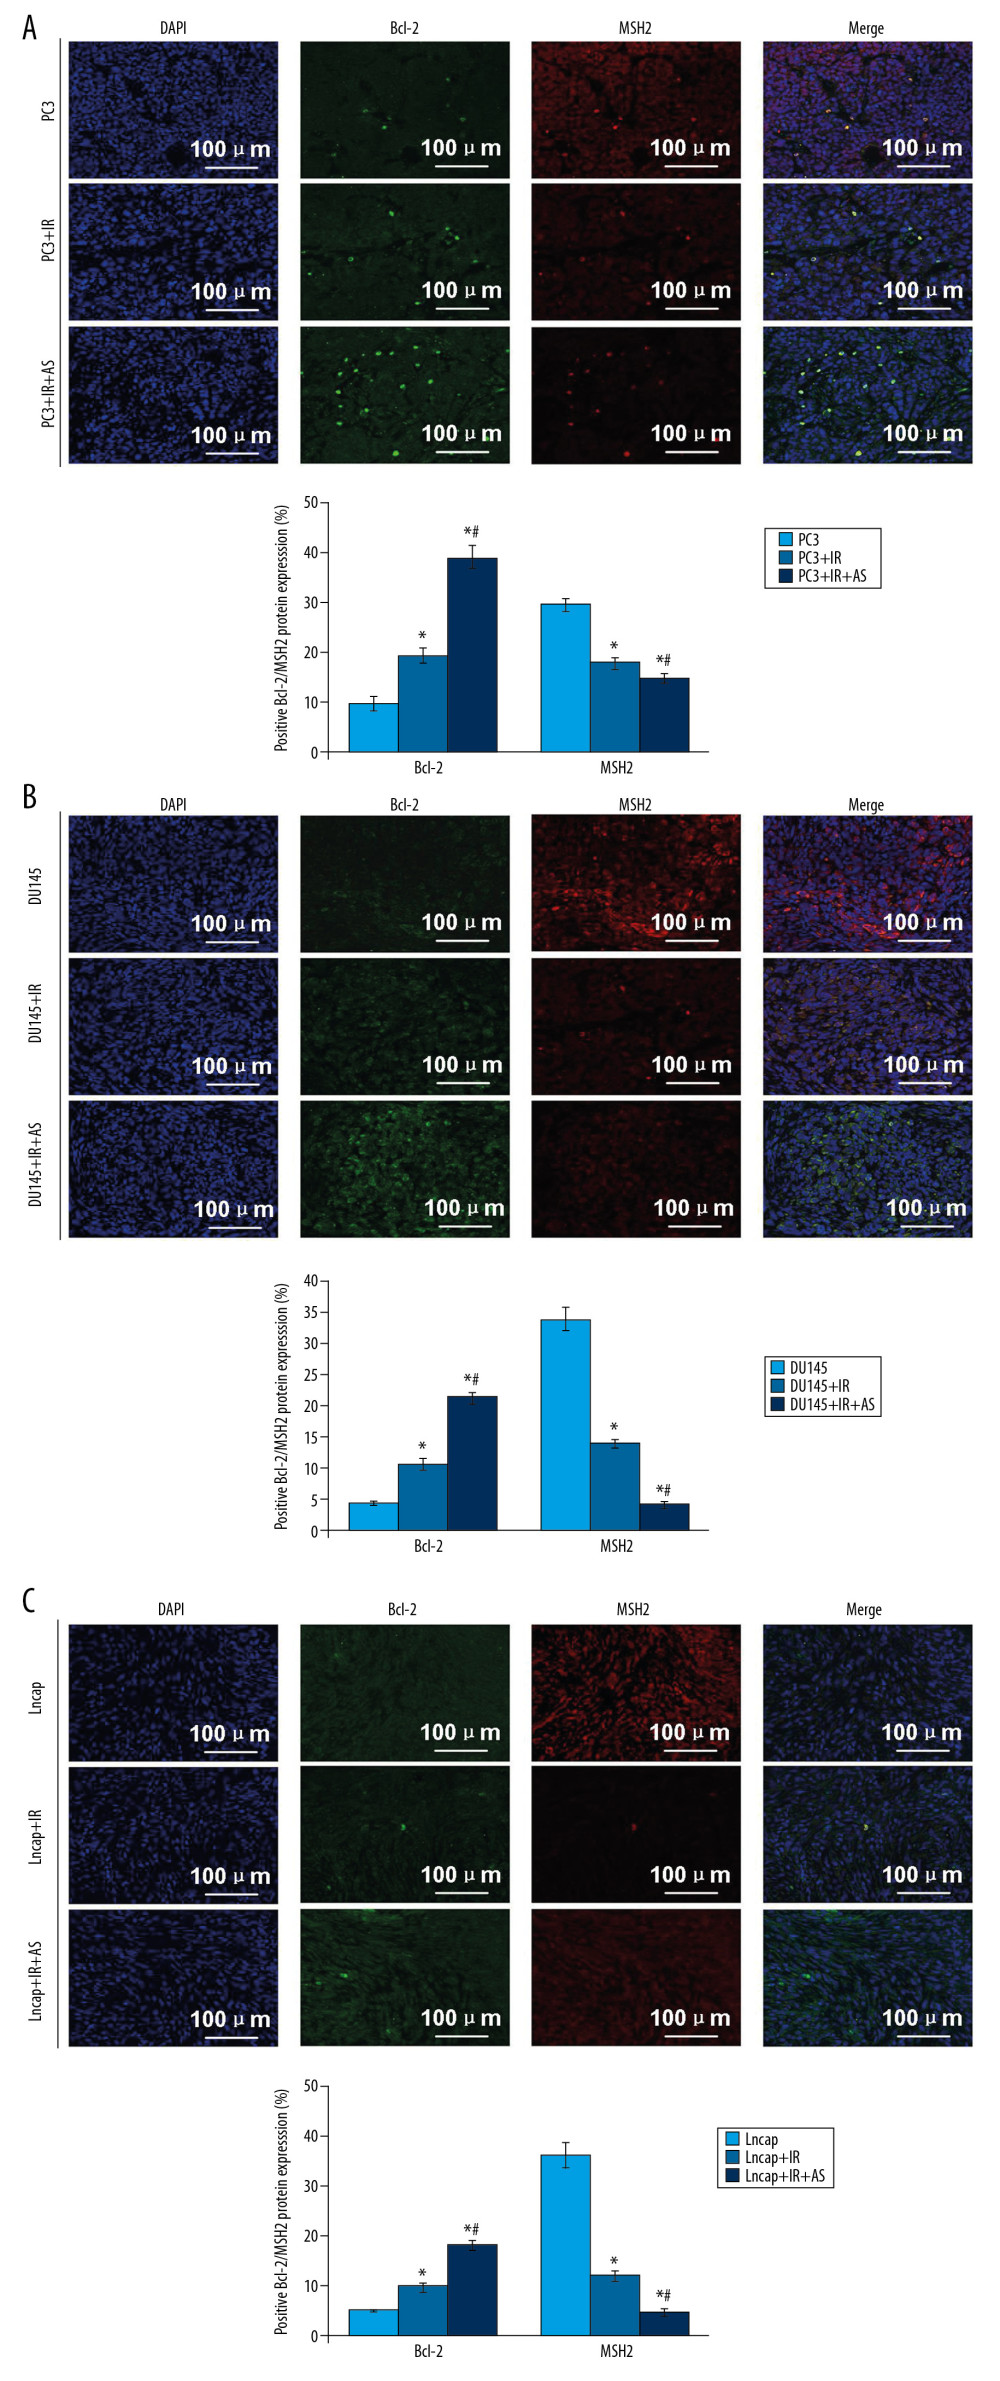 Observation for the interaction between Bcl-2 and MSH2 in tumor tissues of xenograft tumor mice using immuno-fluorescence assay. (A) Expression of Bcl-2 and MSH2 in tumor tissues of PC3-transplanted xenograft tumor mice. (B) Expression of Bcl-2 and MSH2 in tumor tissues of DU145-transplanted xenograft tumor mice. (C) Expression of Bcl-2 and MSH2 in tumor tissues of Lncap-transplanted xenograft tumor mice. * P<0.05 versus PC3 or DU145 or Lncap group. # P<0.05 versus PC3+IR or DU145+IR or Lncap+IR group. The scale bars were illustrated in images.